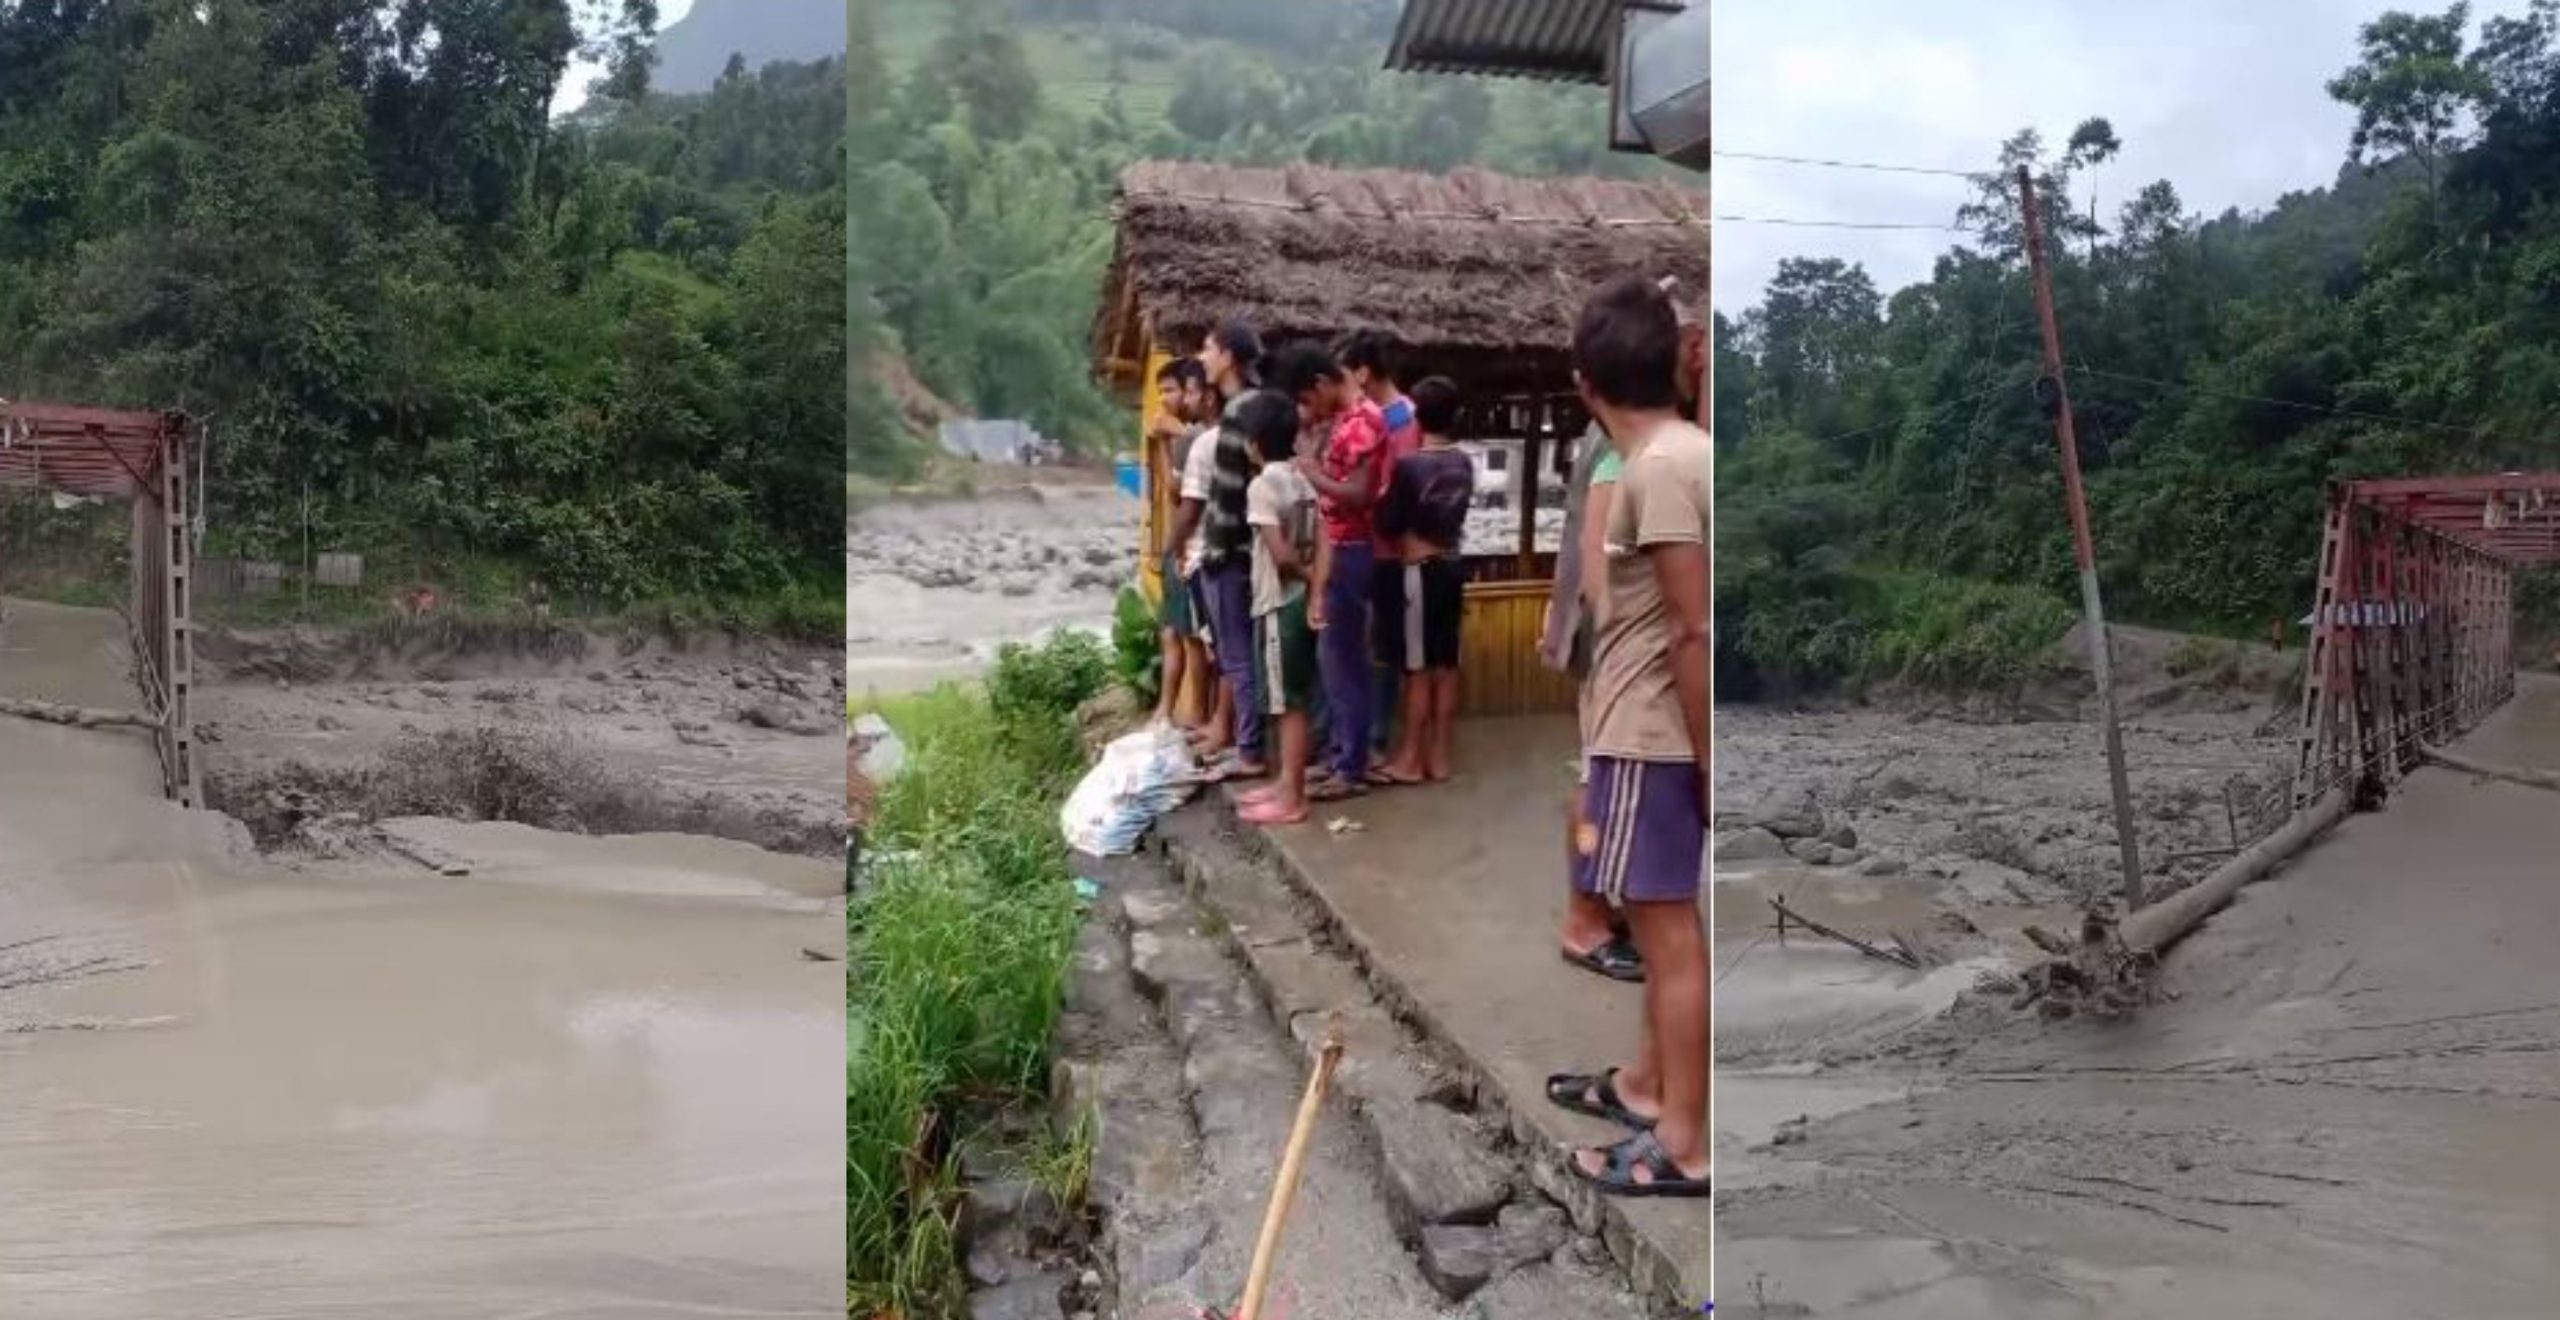 Floods again in Melamchi, damage to some houses